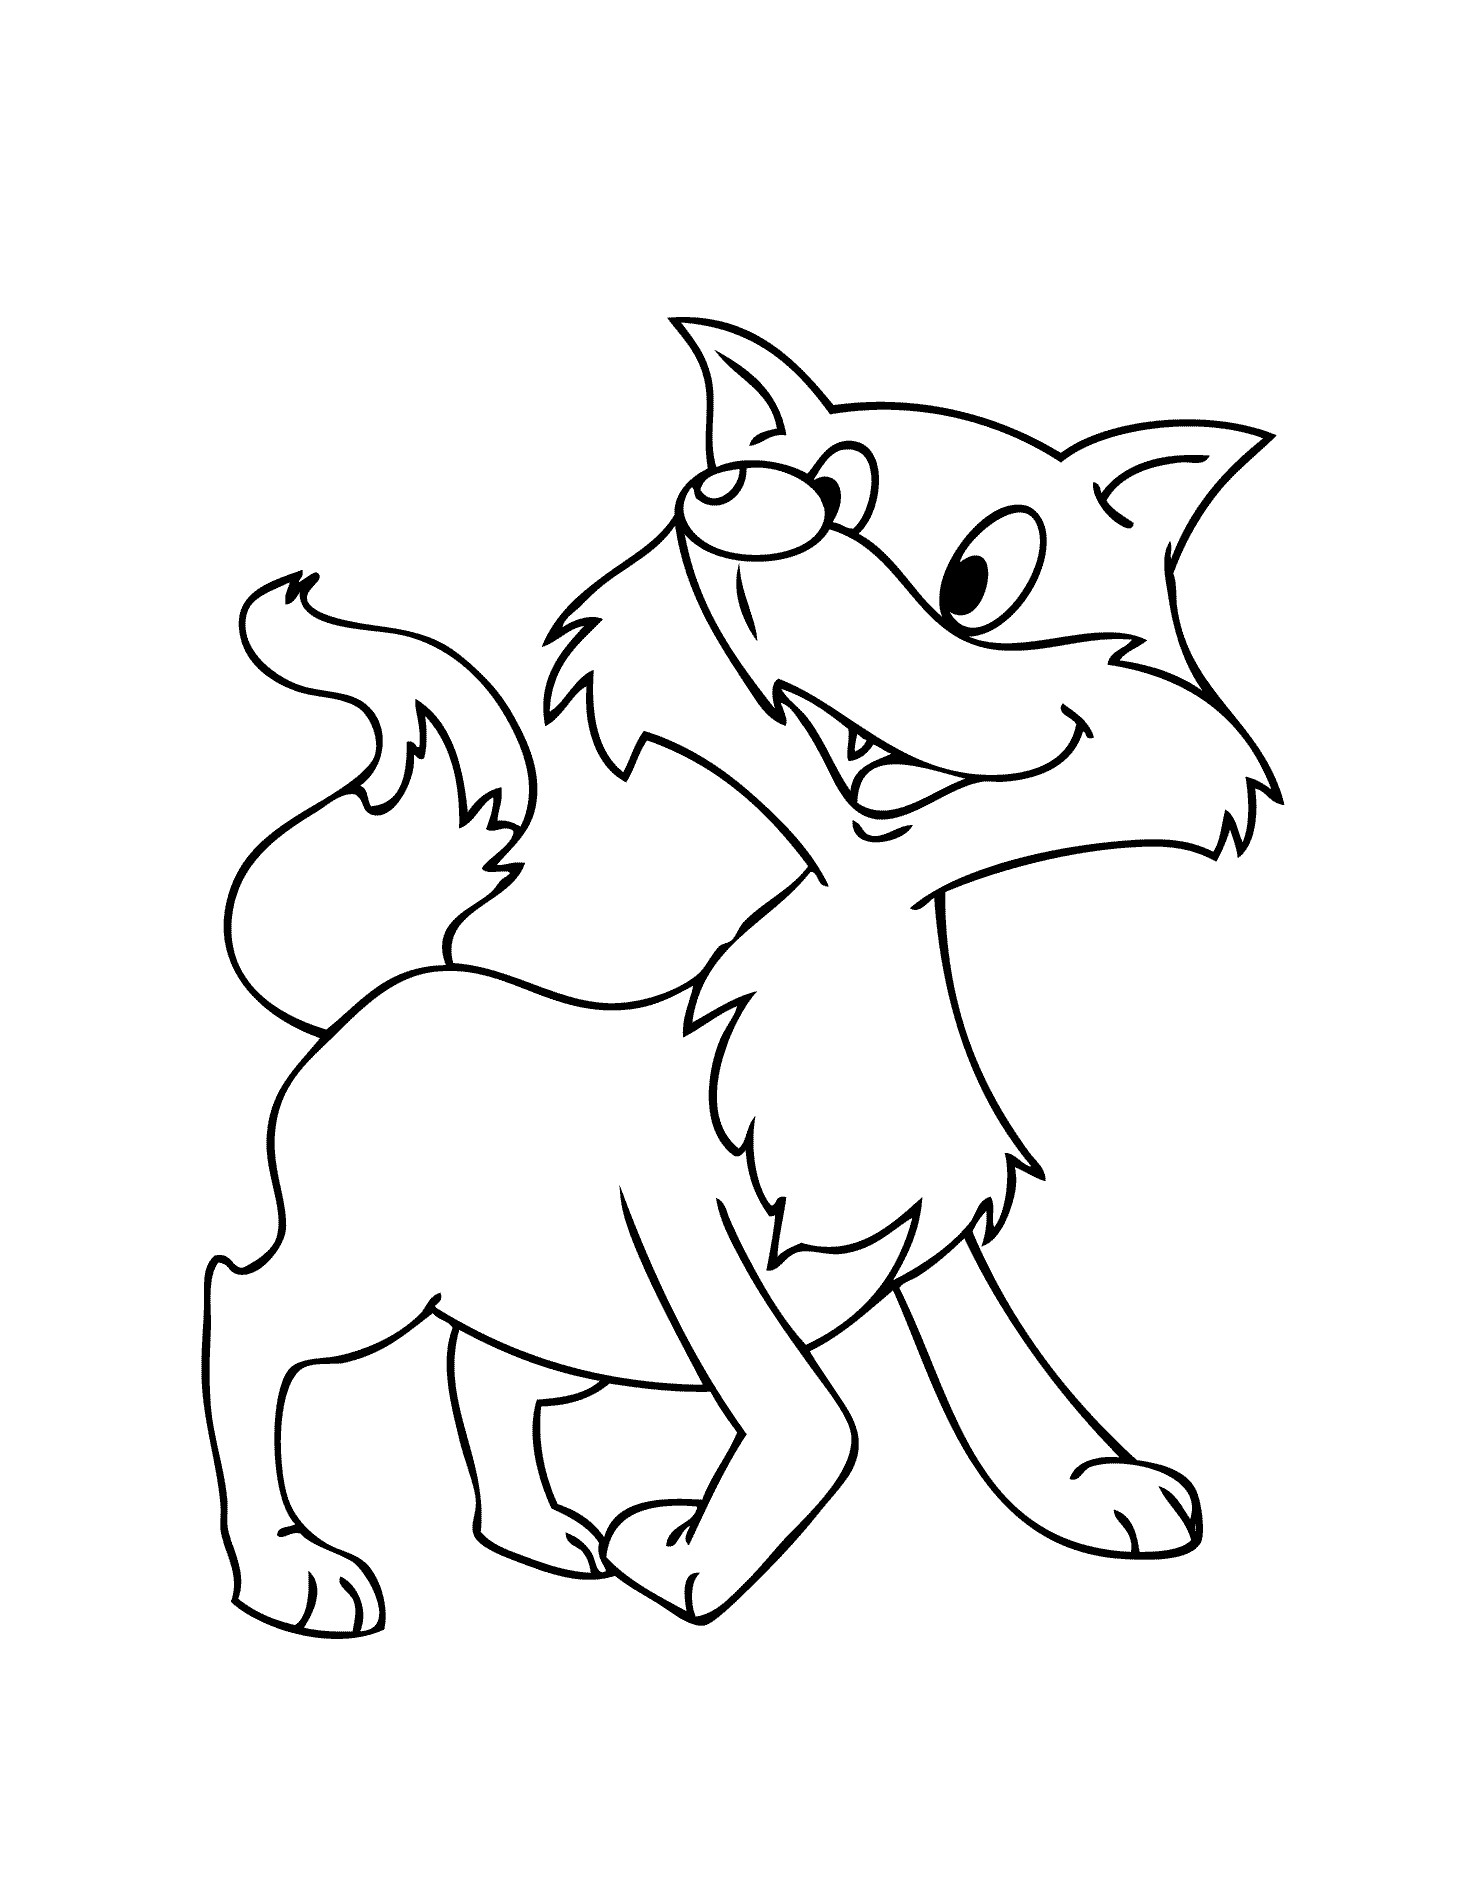 Printable Coloring Pages For Kids Animals
 Animal coloring sheets for kids Coloring pages for kids